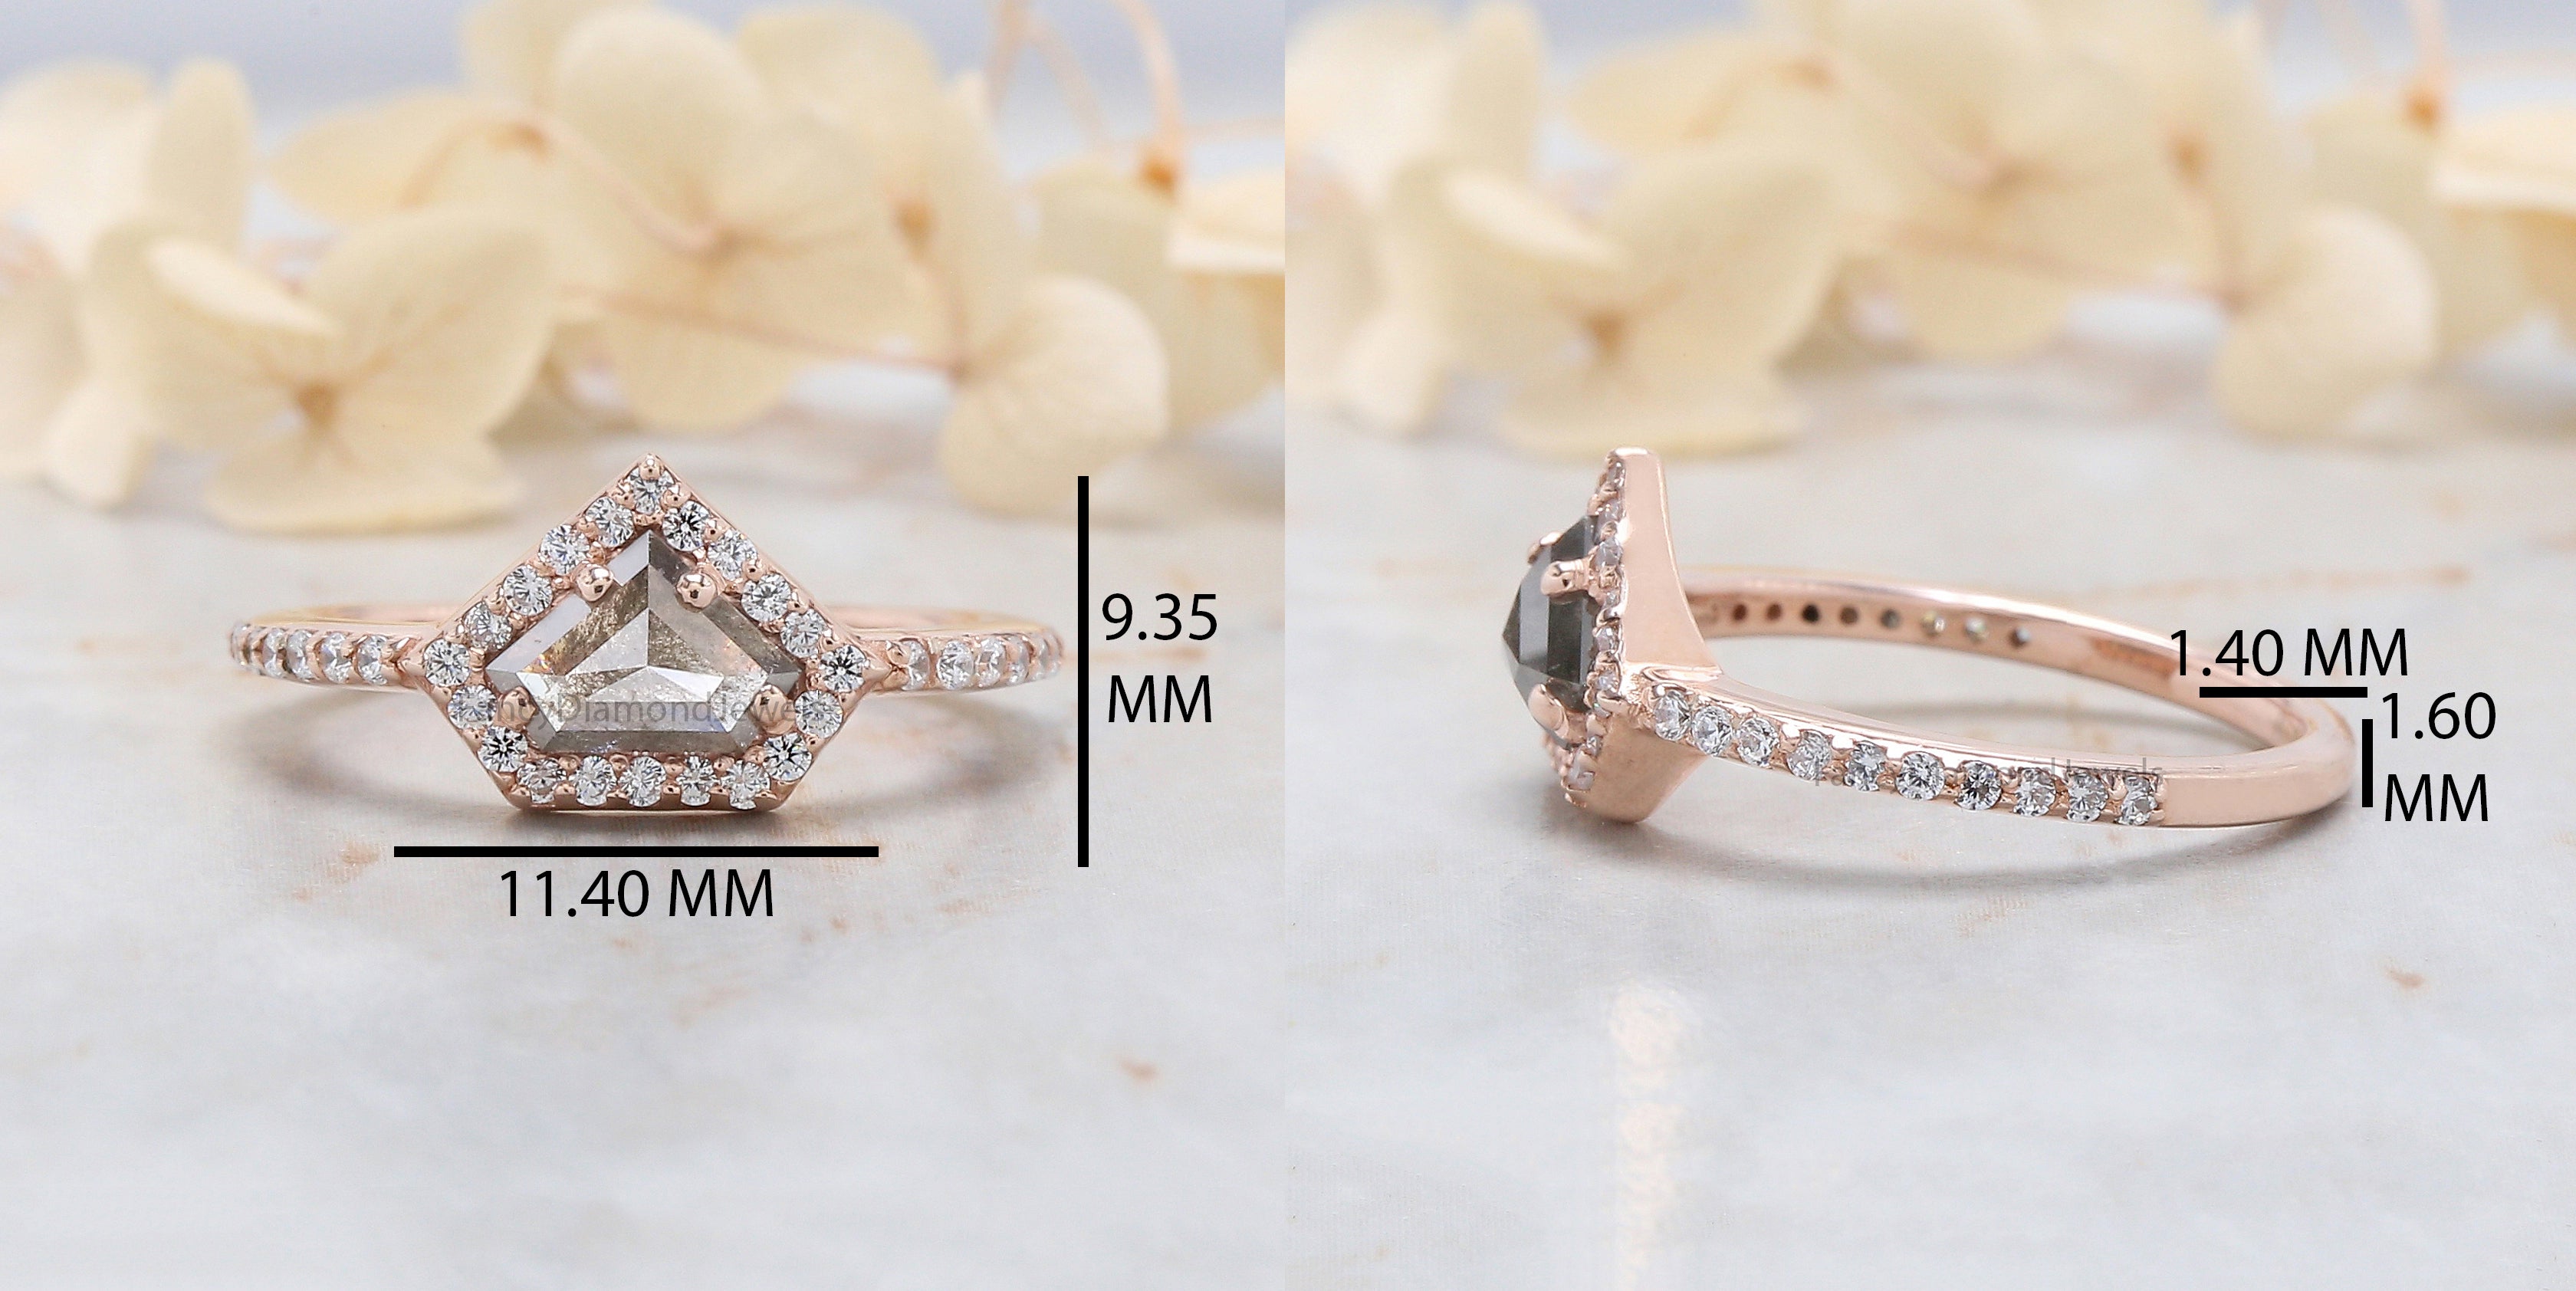 Shield Cut Salt And Pepper Diamond Ring 0.81 Ct 5.50 MM Shield Diamond Ring 14K Solid Rose Gold Silver Engagement Ring Gift For Her QN1251